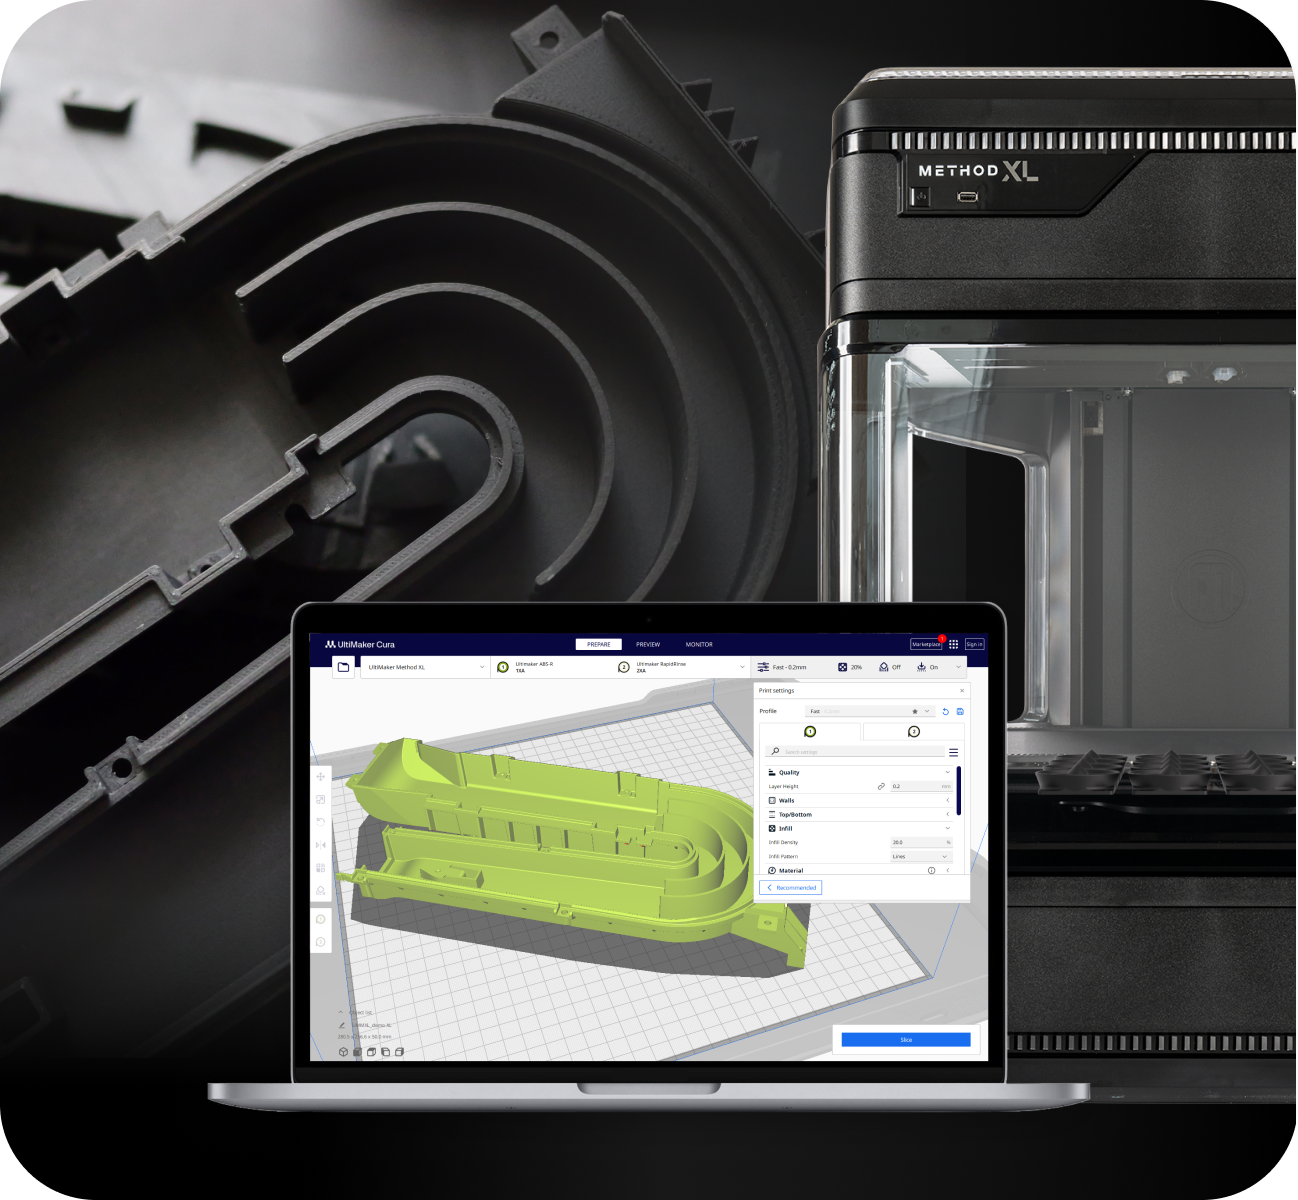 UltiMaker adds Method series 3D Printers to Cura Software for Enhanced Slicing Capabilities